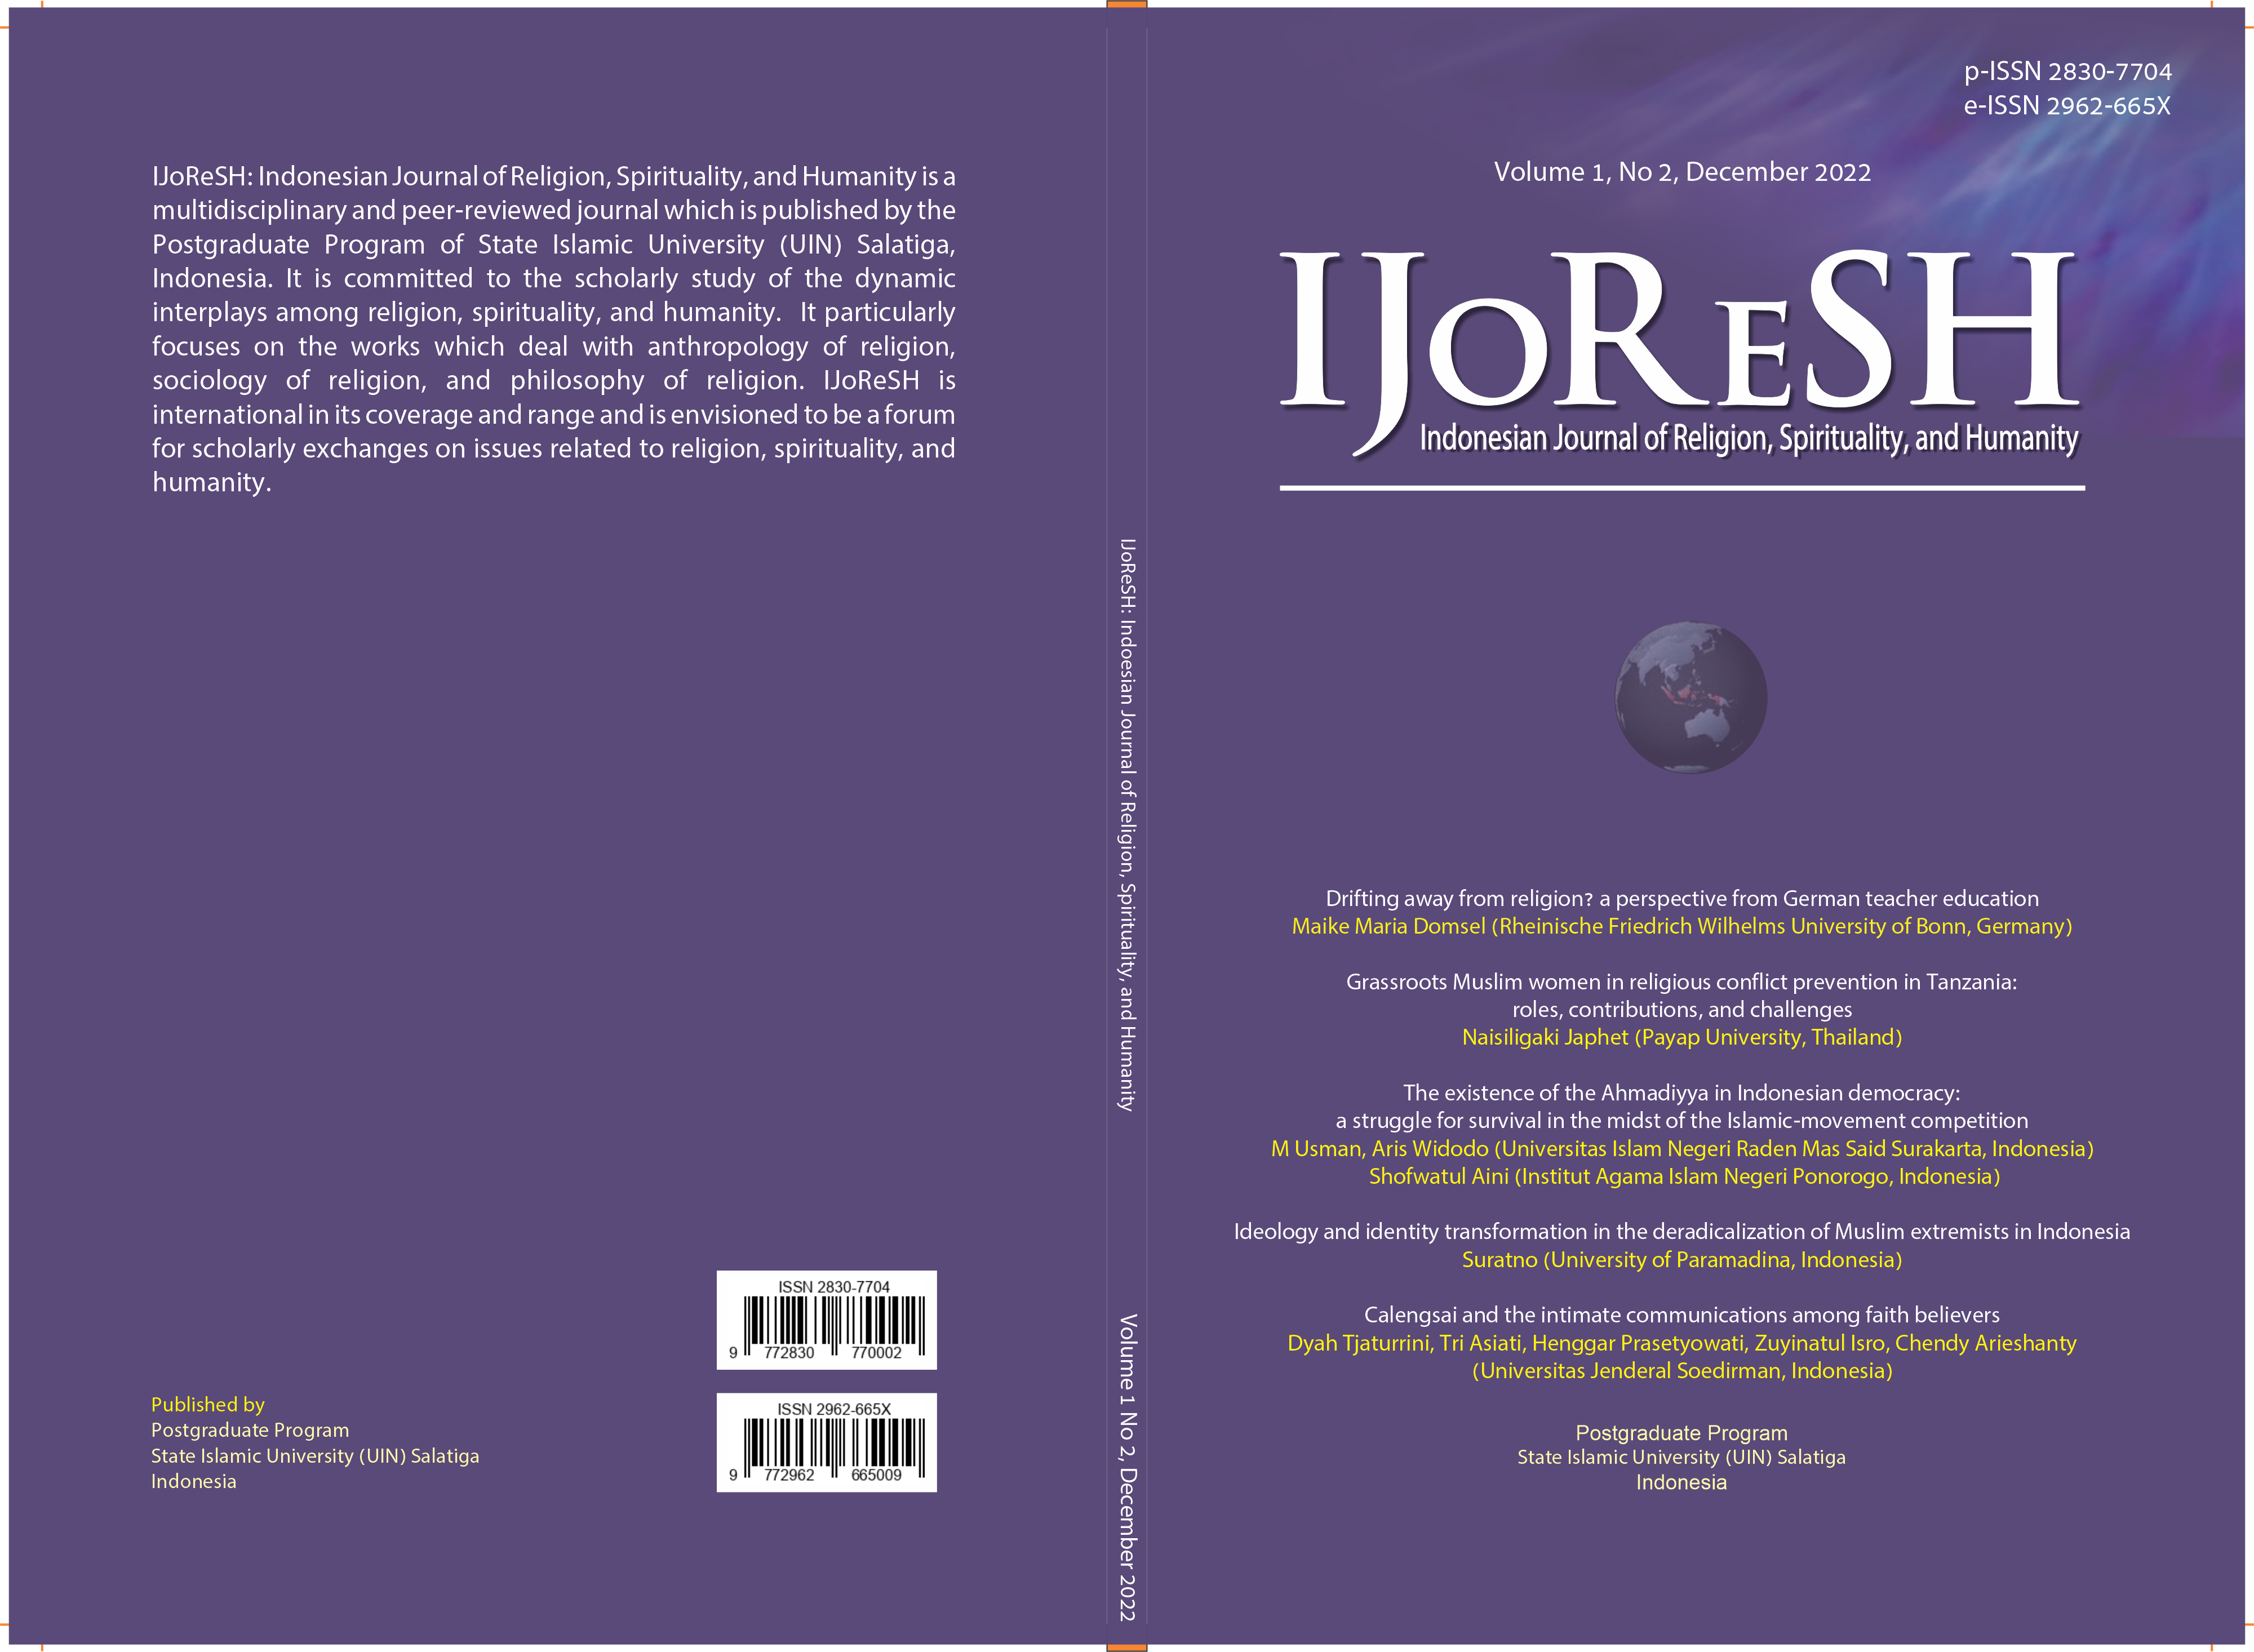 					View Vol. 1 No. 2 (2022): Indonesian Journal of Religion, Spirituality, and Humanity
				